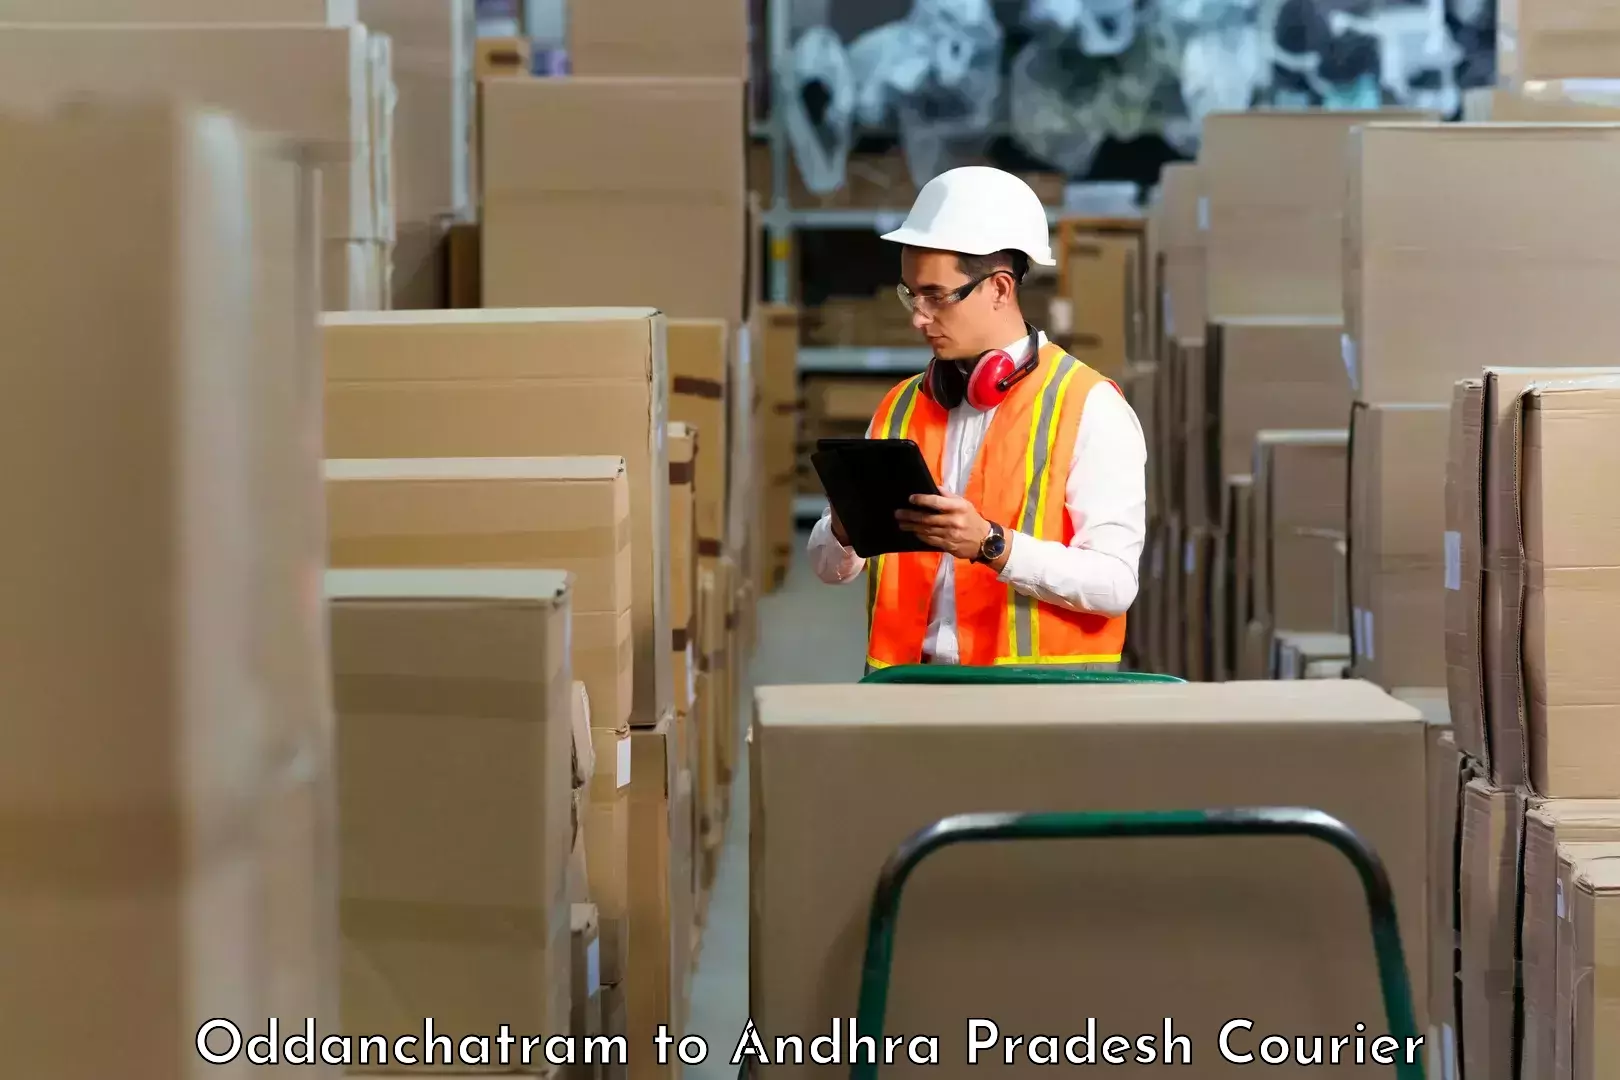 Automated parcel services Oddanchatram to Gudur